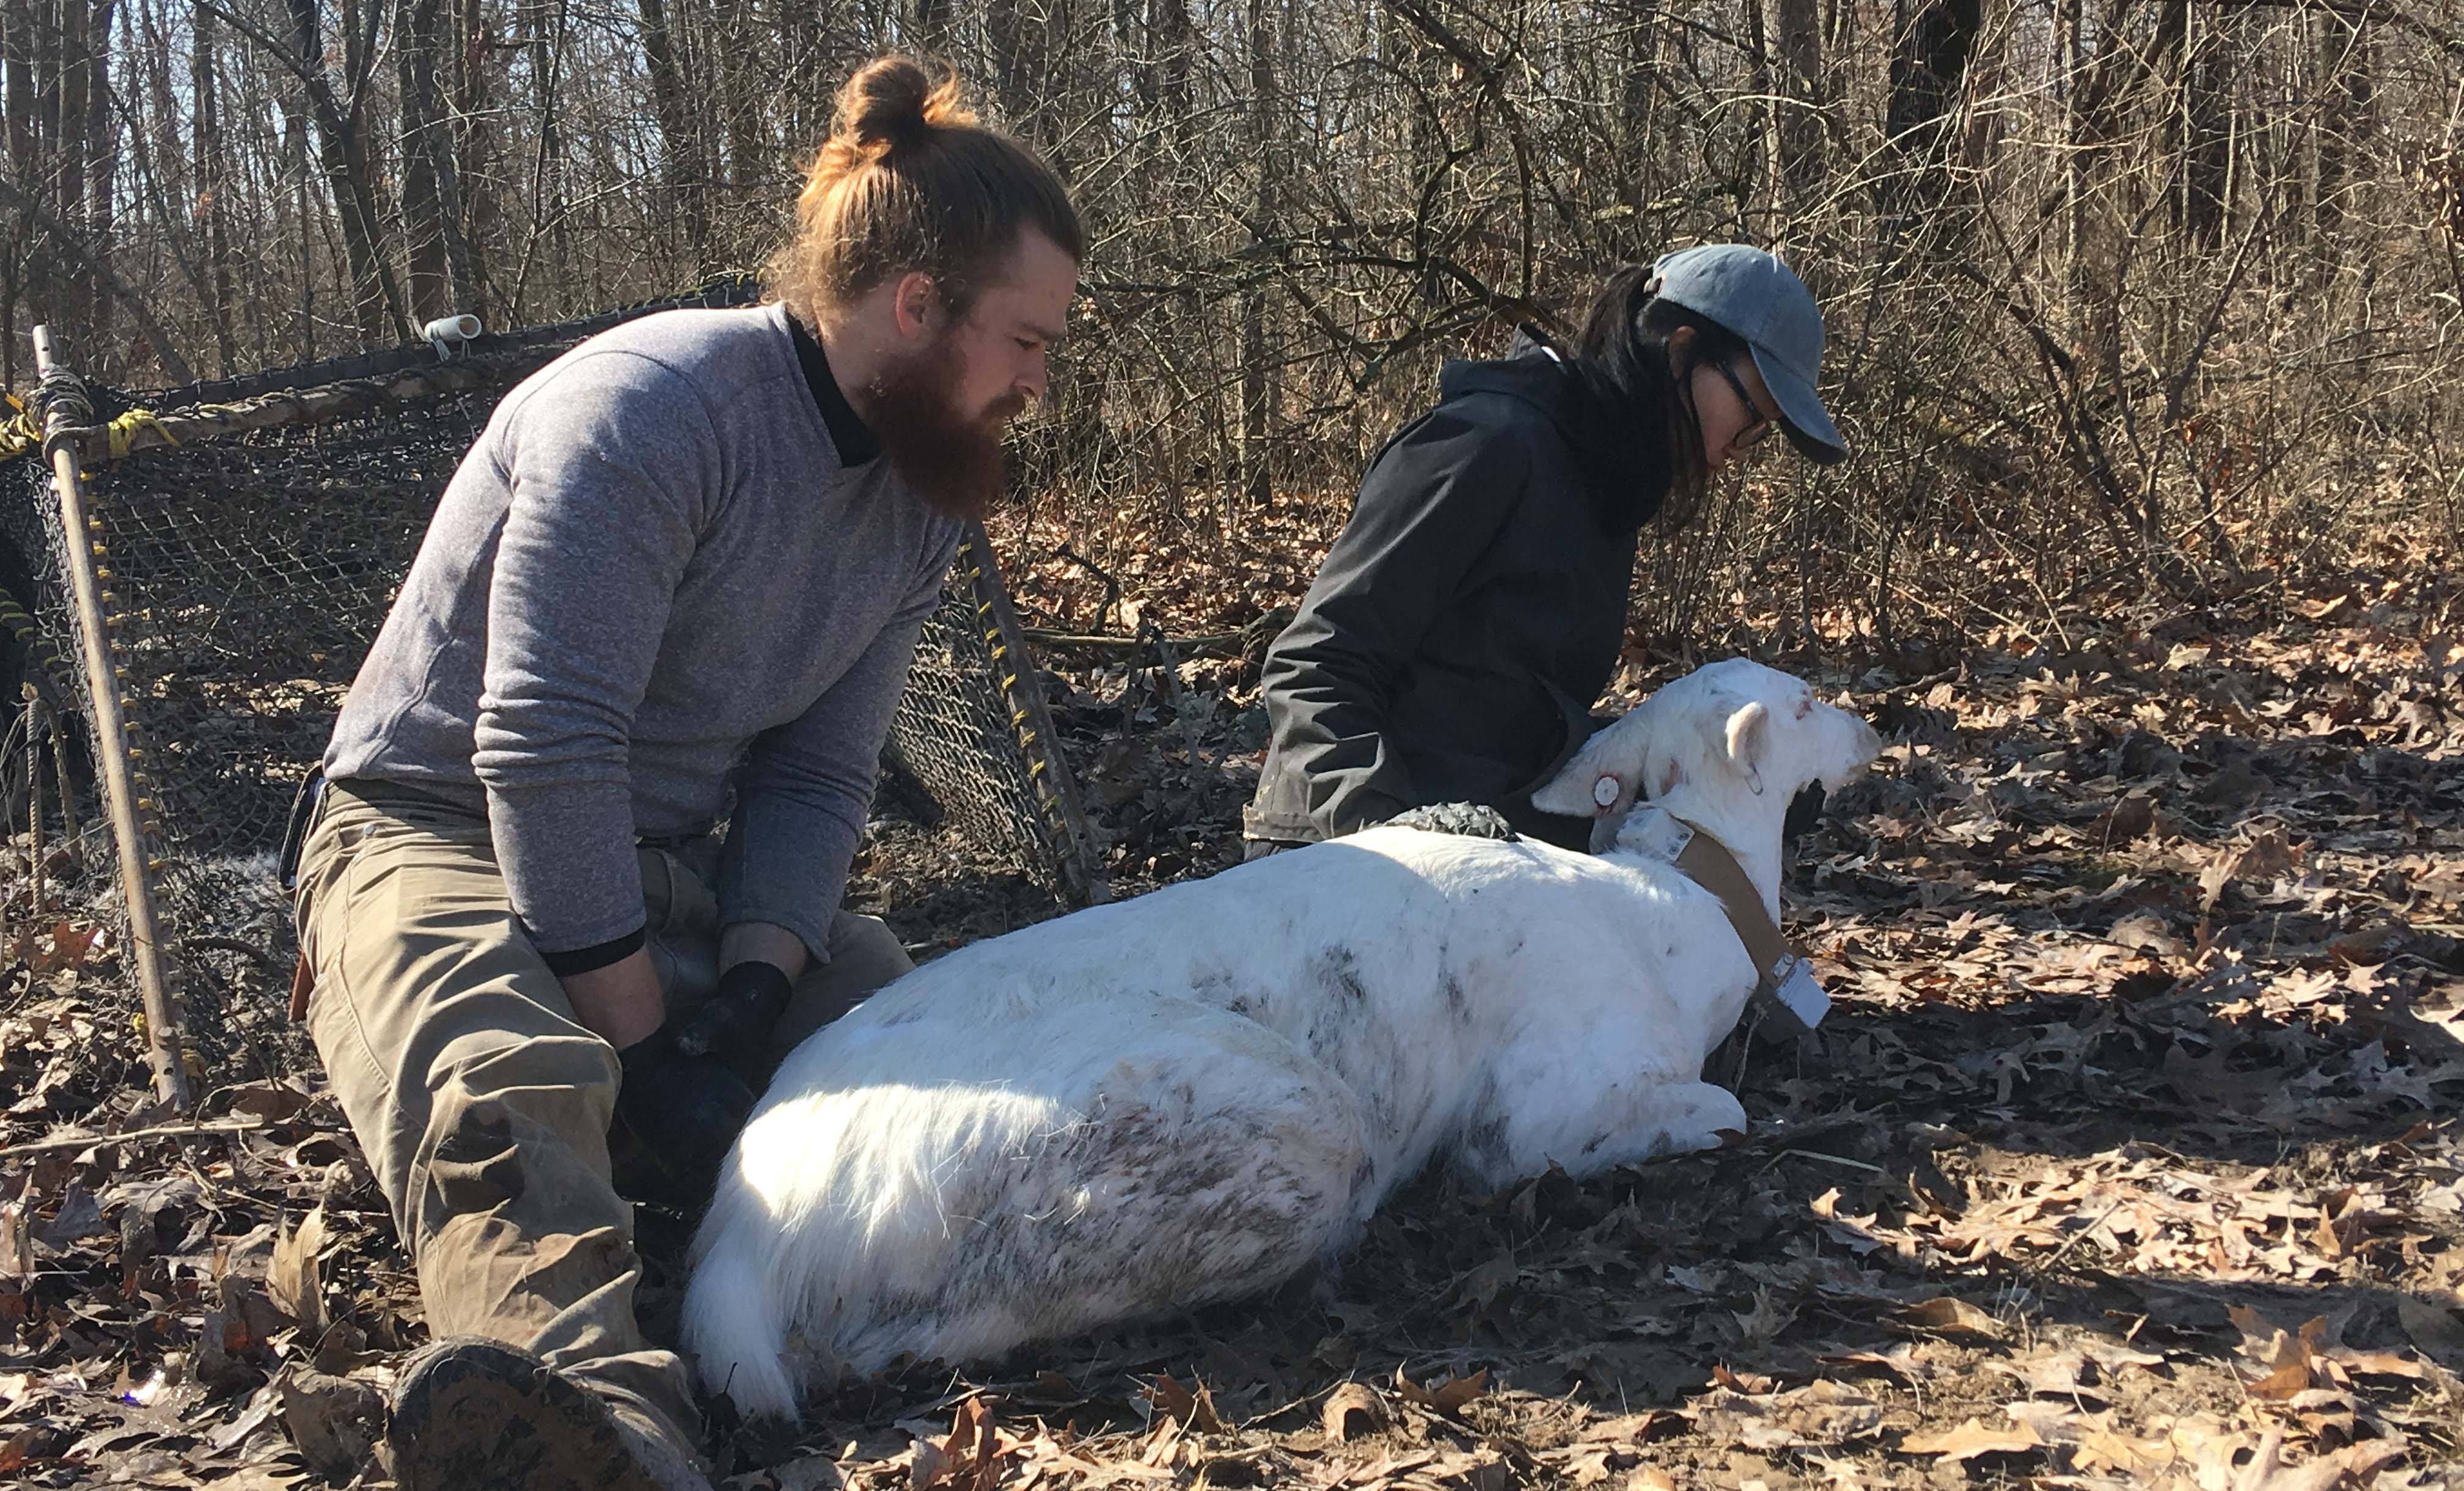 Fisheries, wildlife and conservation biology alumna Clare Tan Yi Fang with another deer capture technician and a rare albino deer.